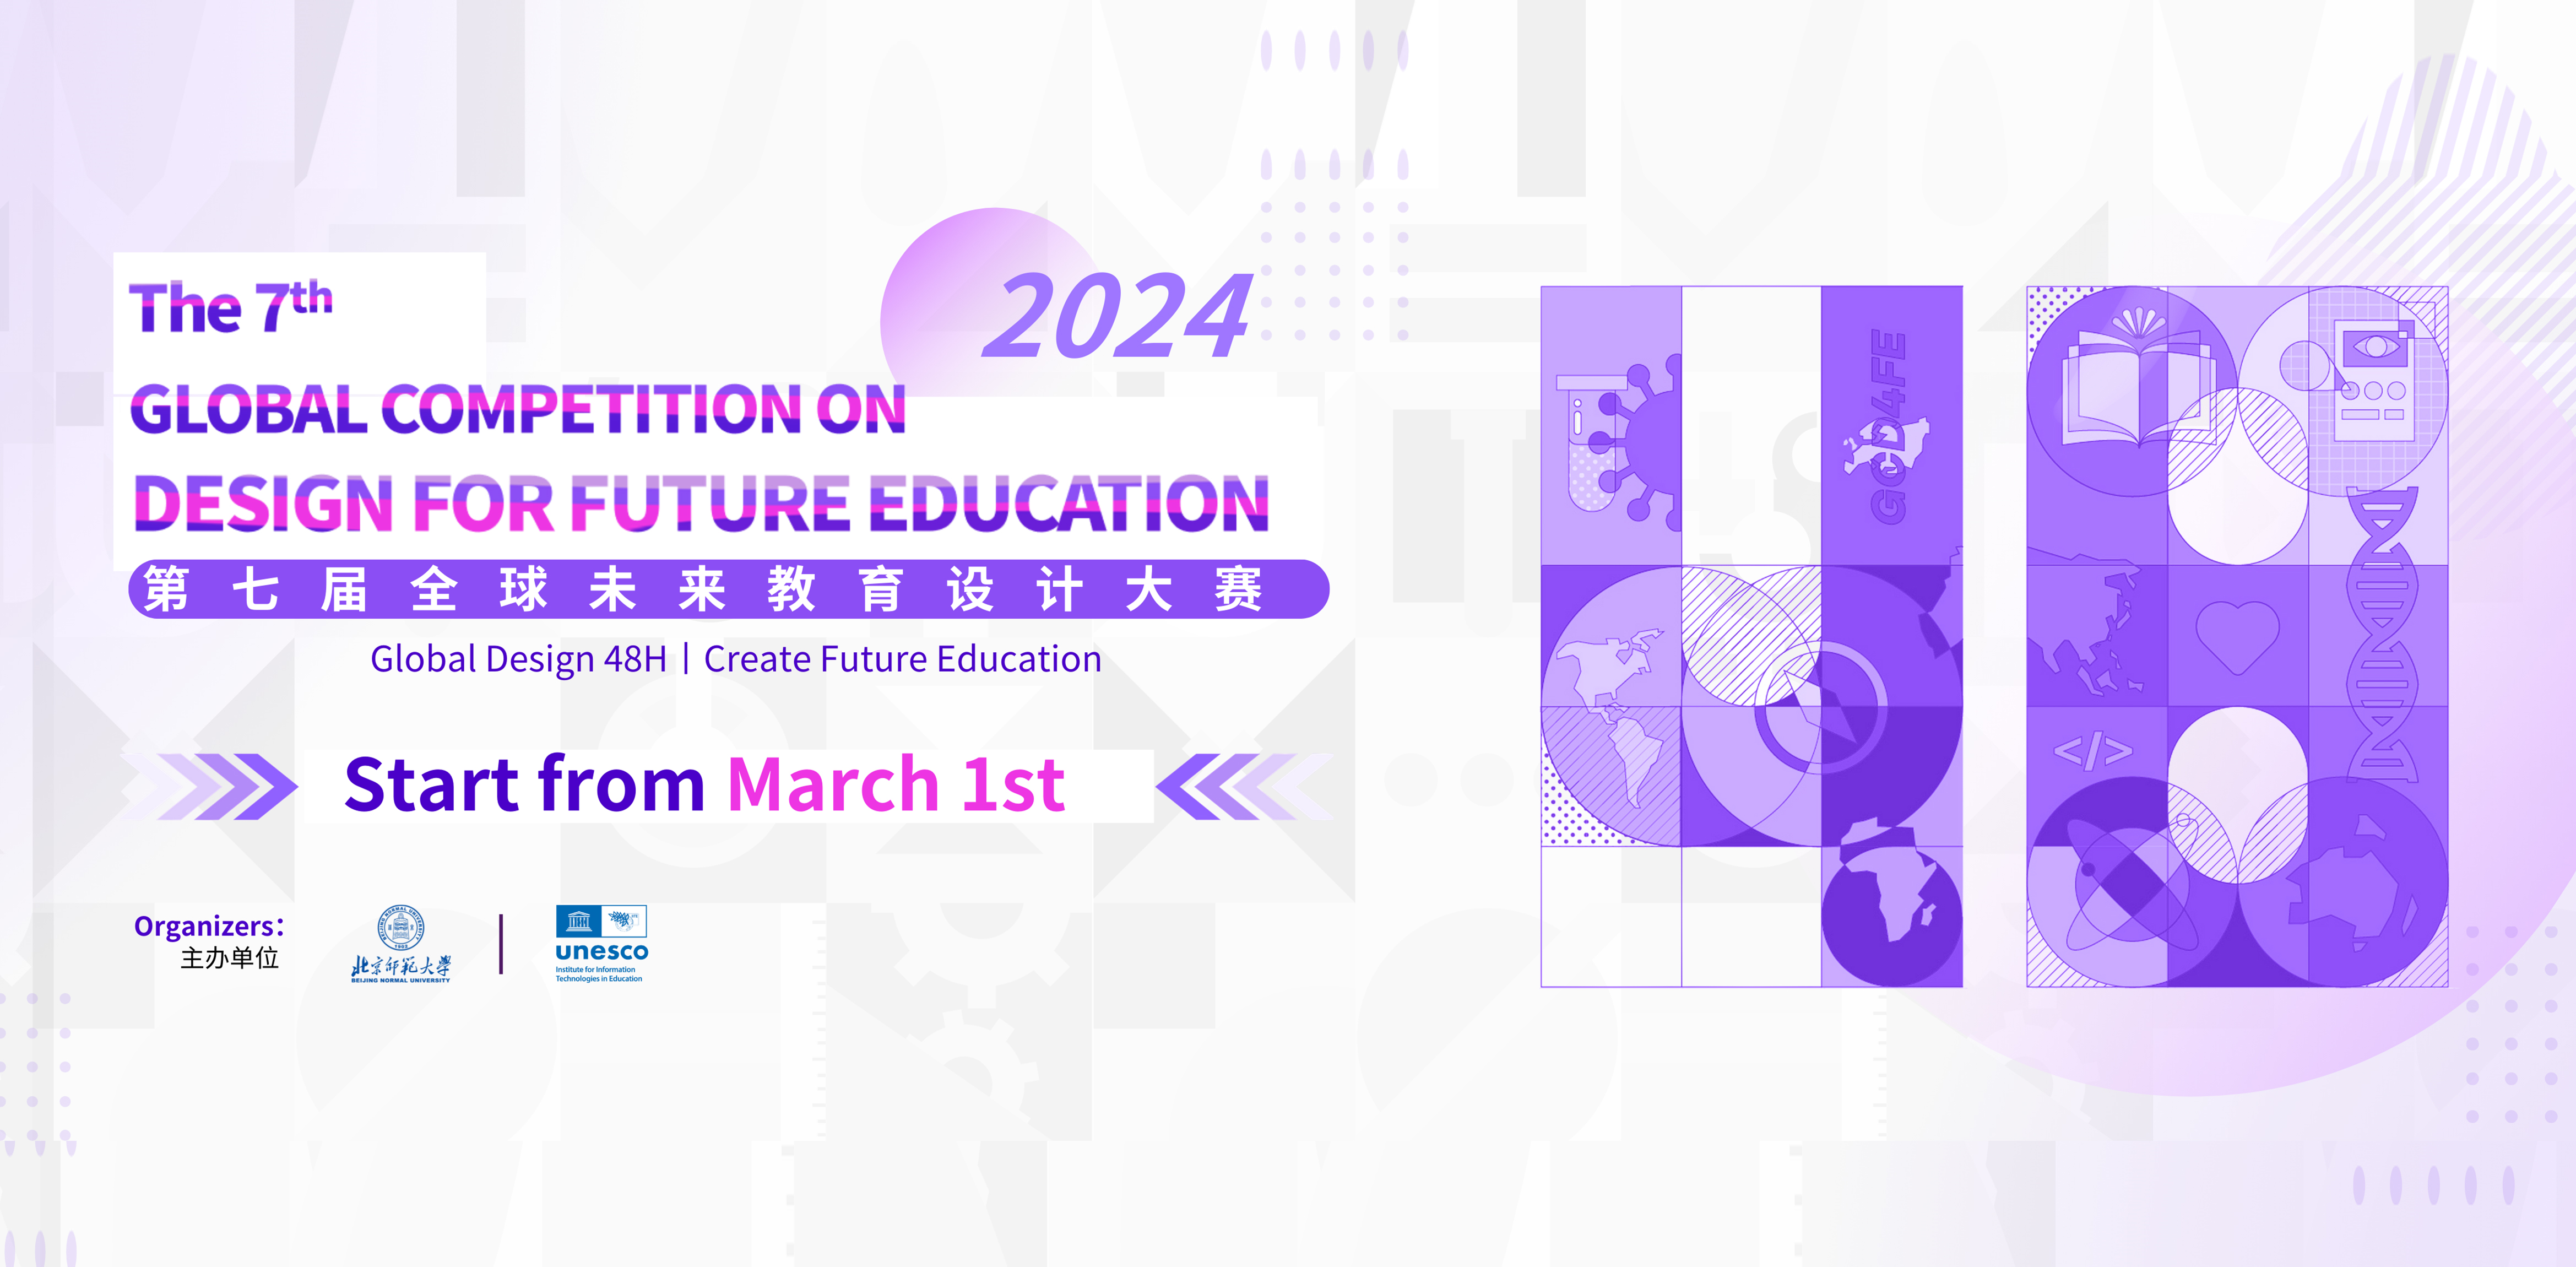 Ready for Registration? The 7th Global Competition on Design for Future Education is coming!